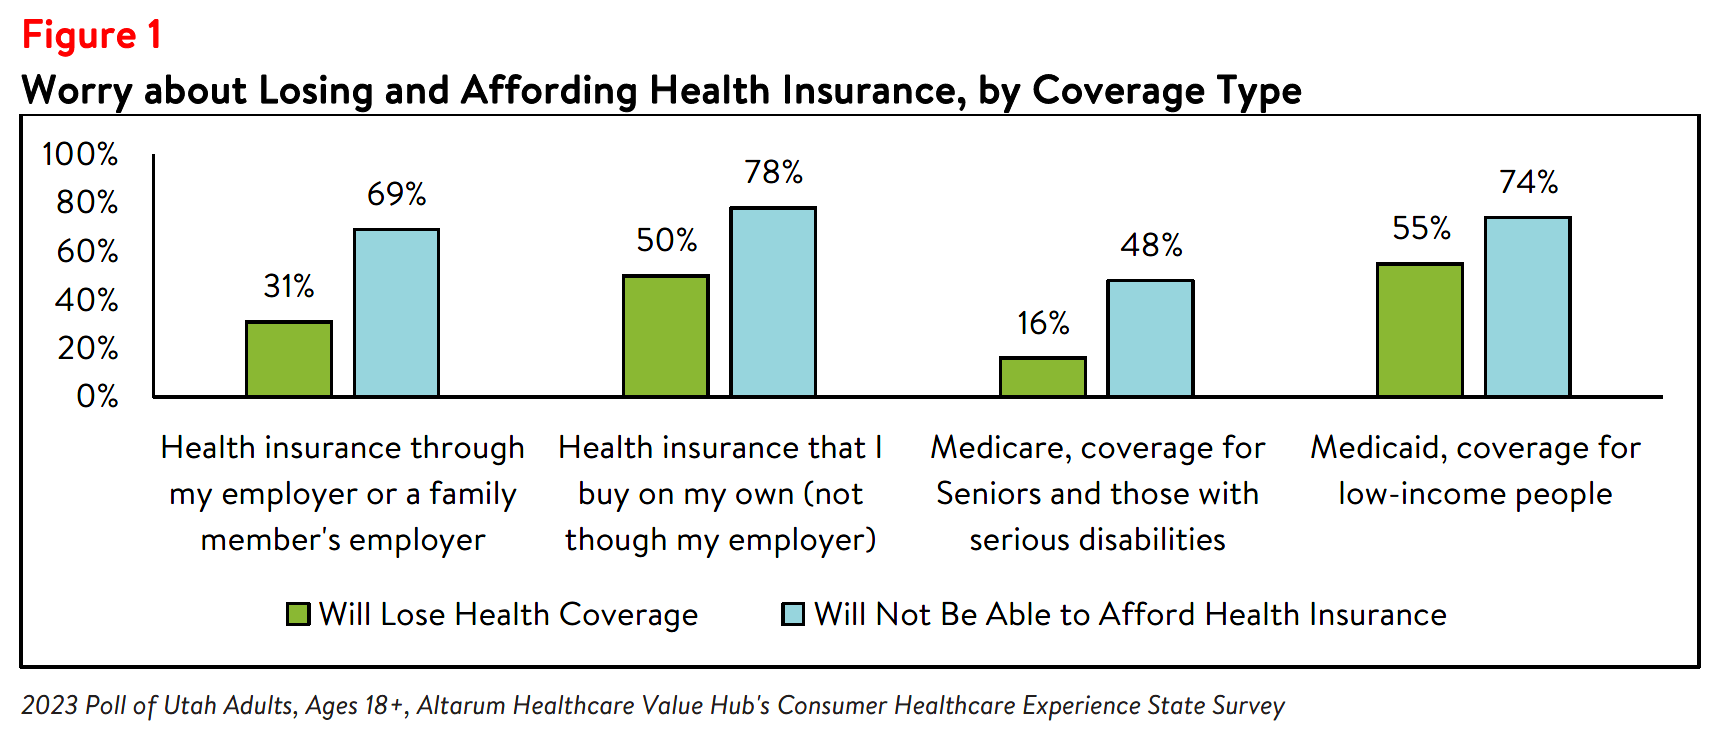 Utah Residents Struggle to Afford High Healthcare Costs_Affordability Figure1.png